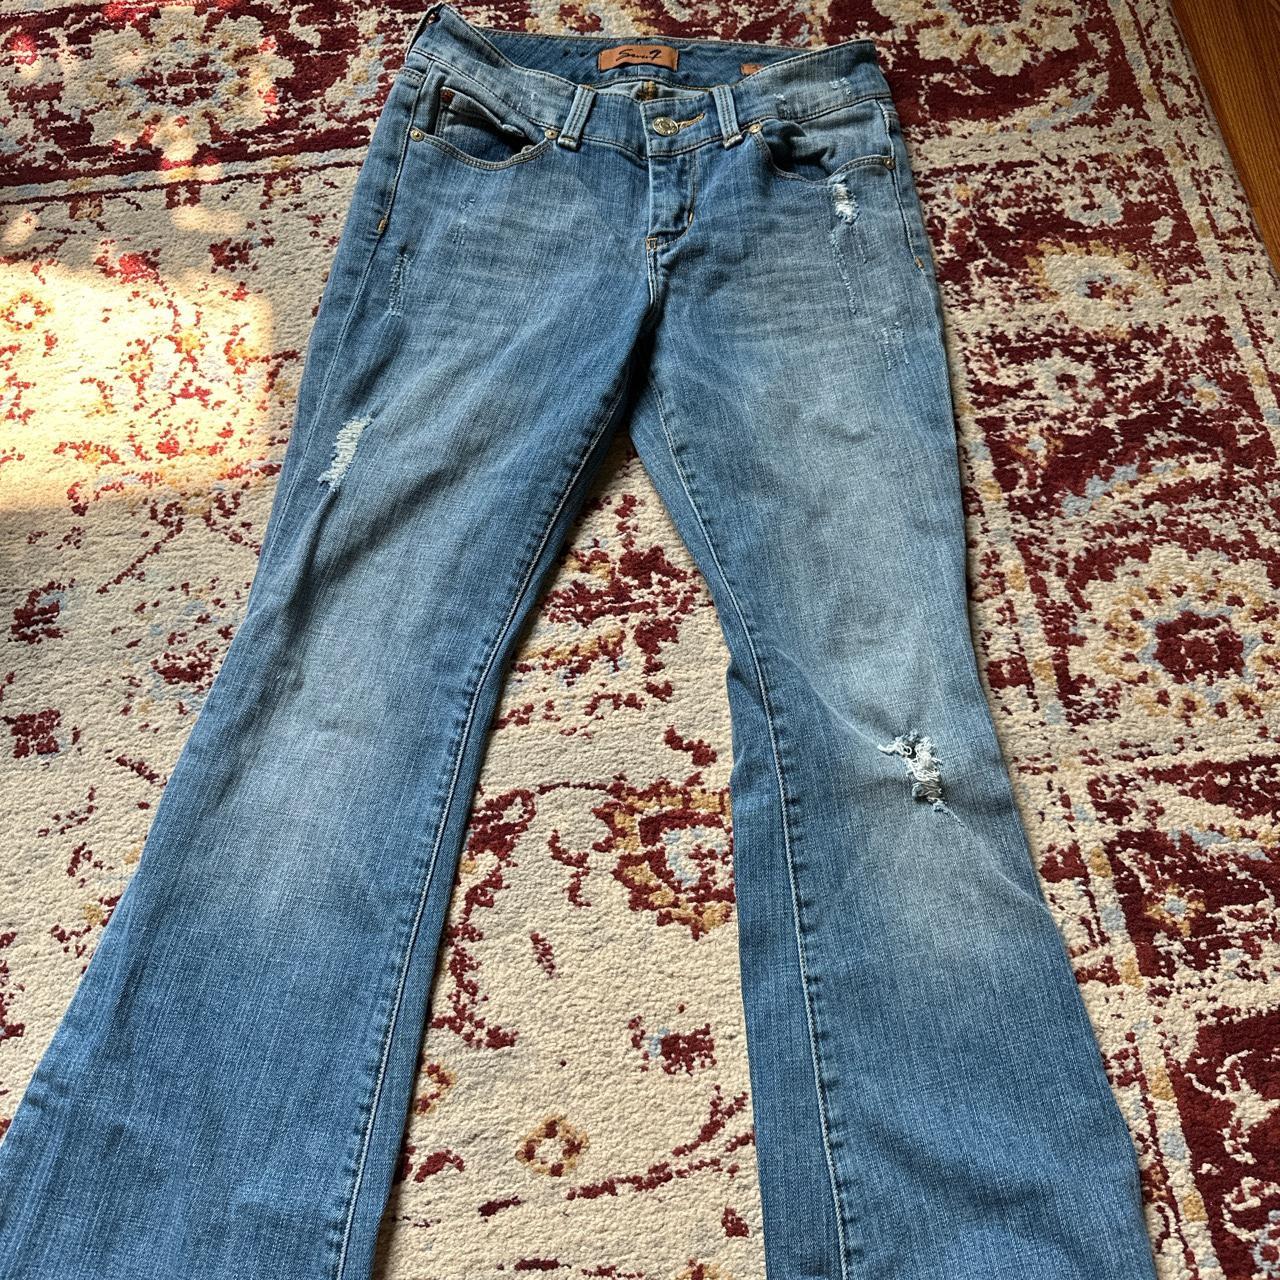 “Very flared” seven7 jeans, Signs of wear include